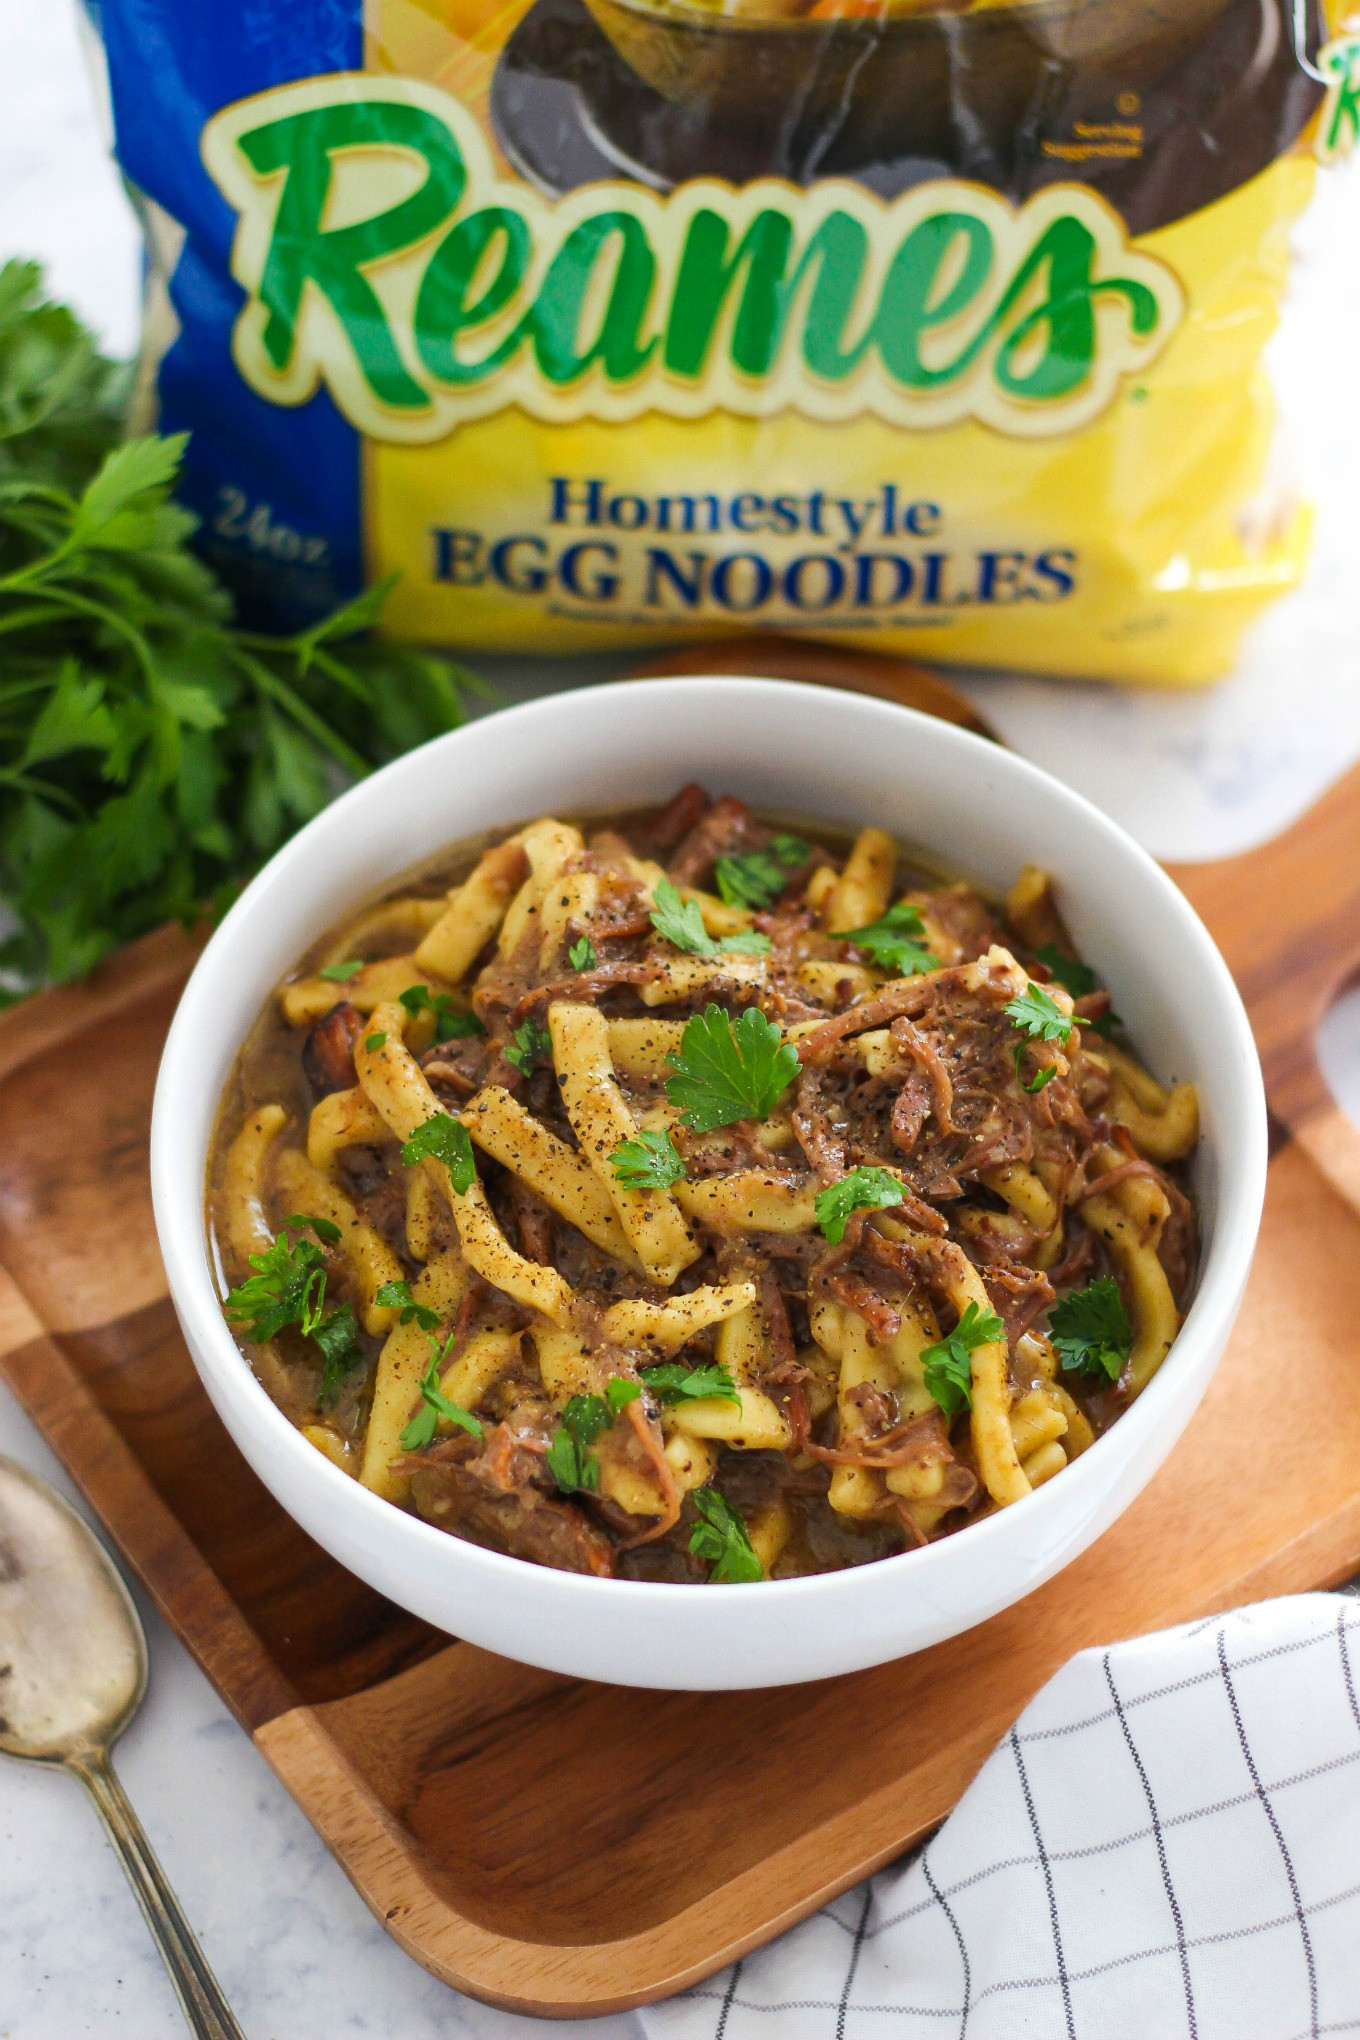 Easy Beef And Noodles Recipe Stovetop
 reames egg noodles slow cooker